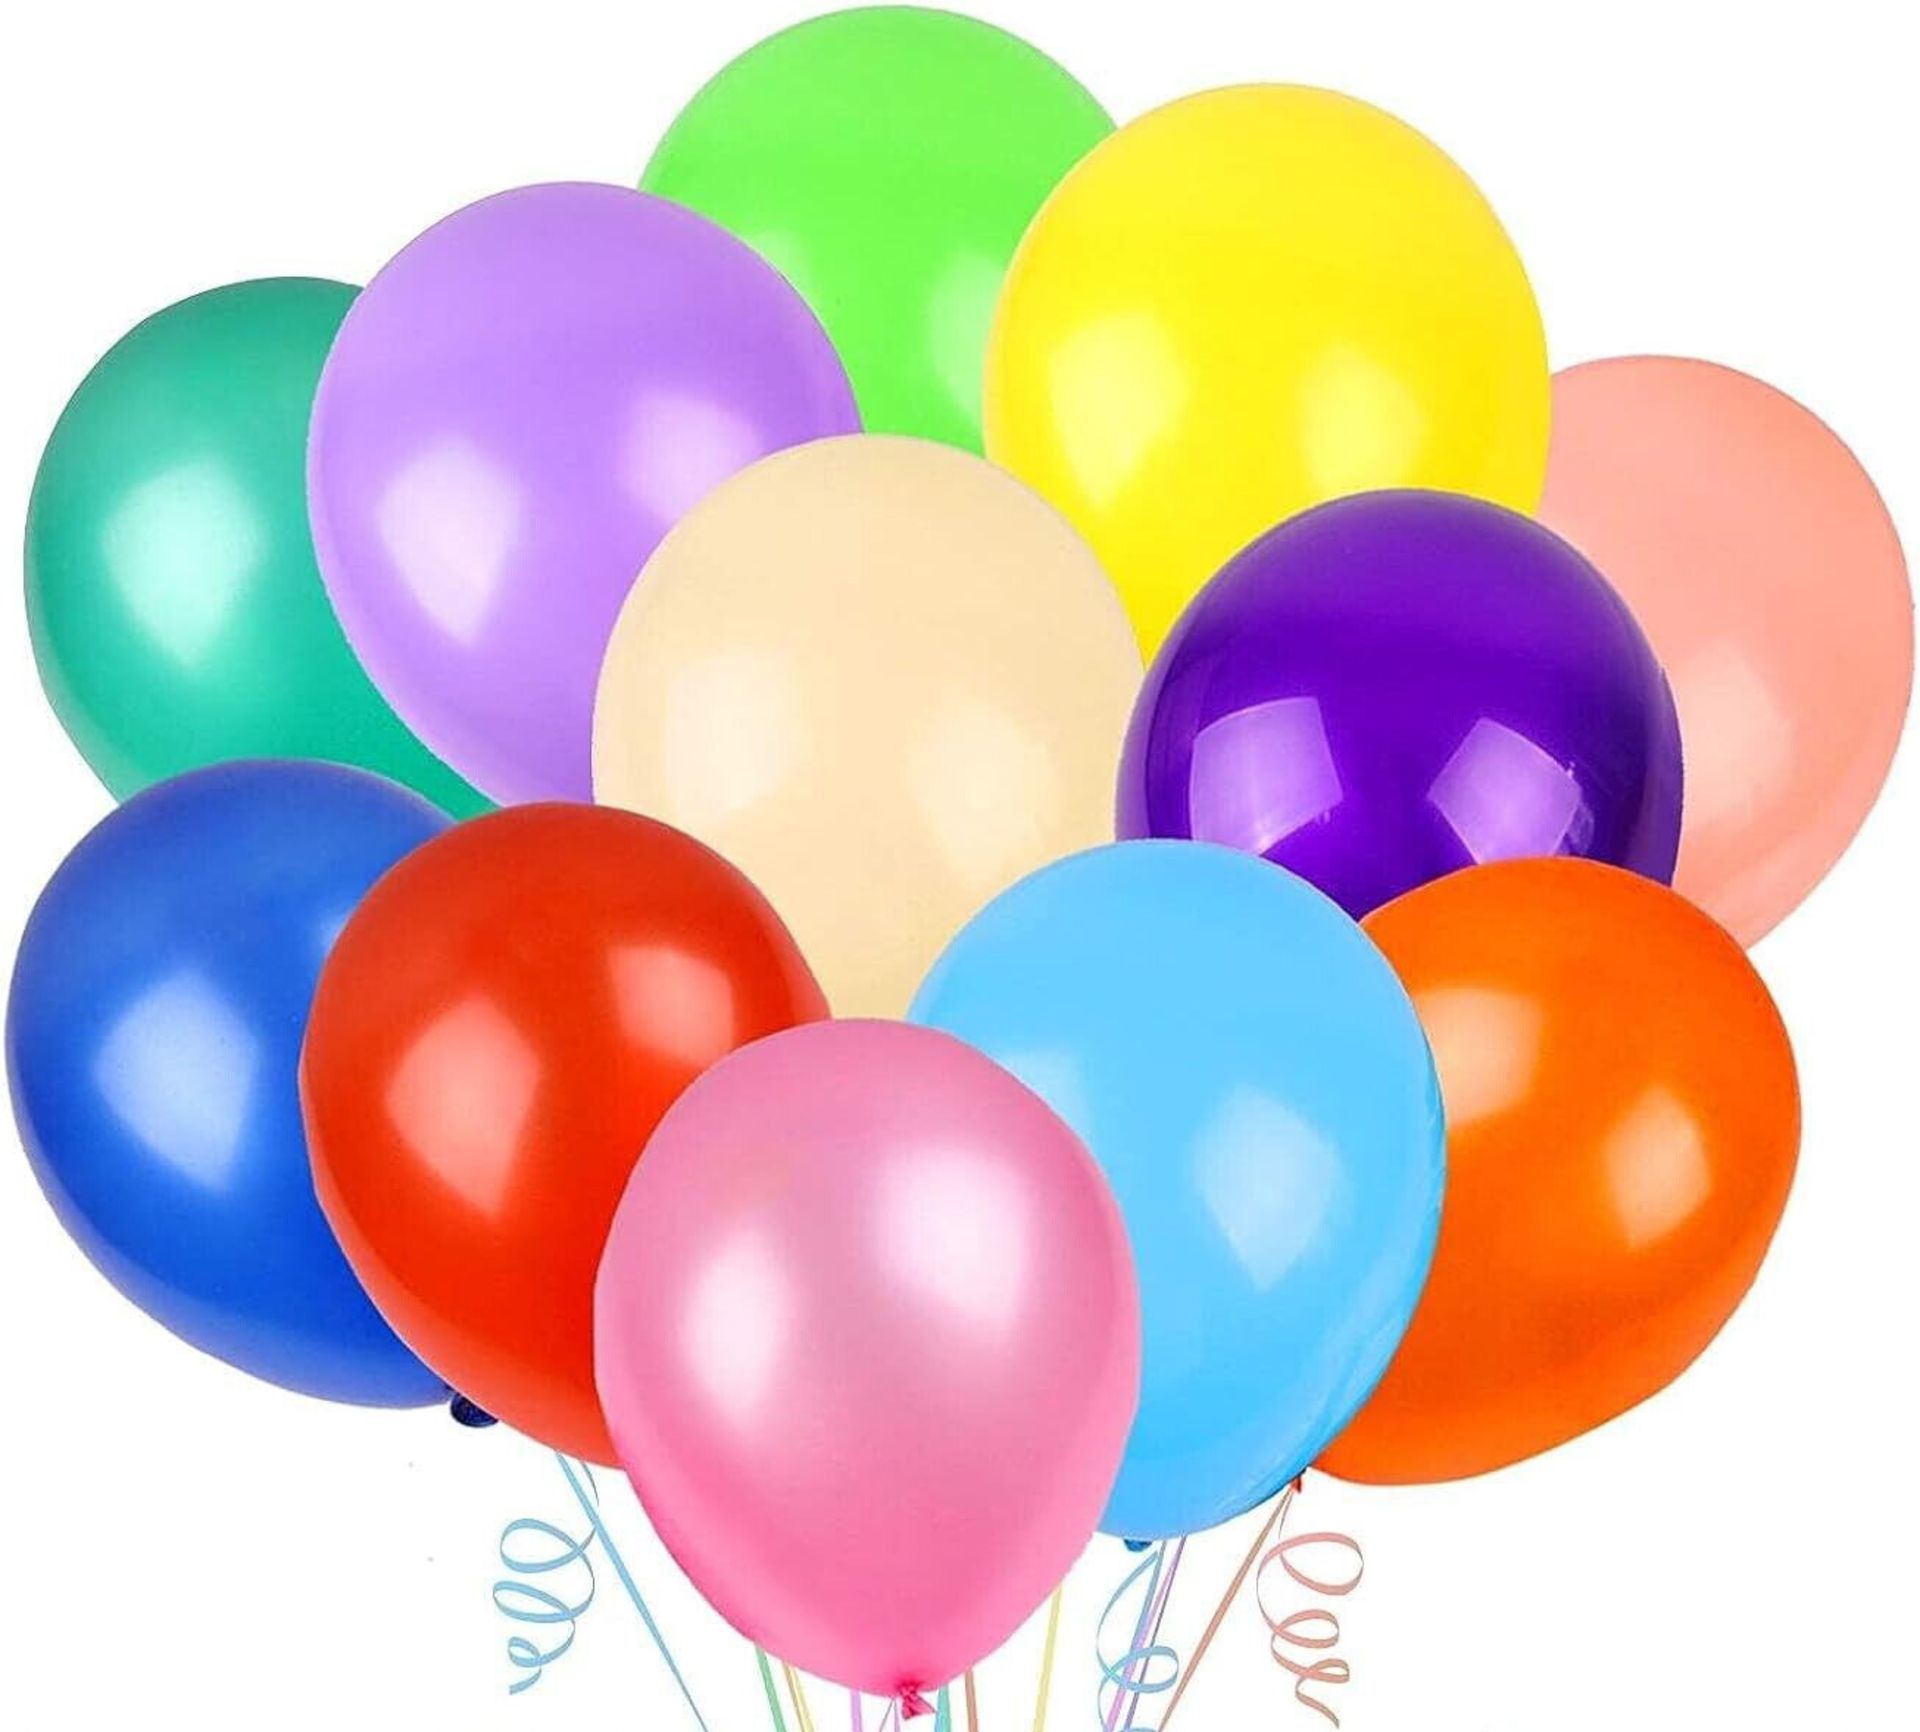 100 X NEW 9"&6" - 24 PACK ASSORTED COLOURED BALLOONS - Image 2 of 4